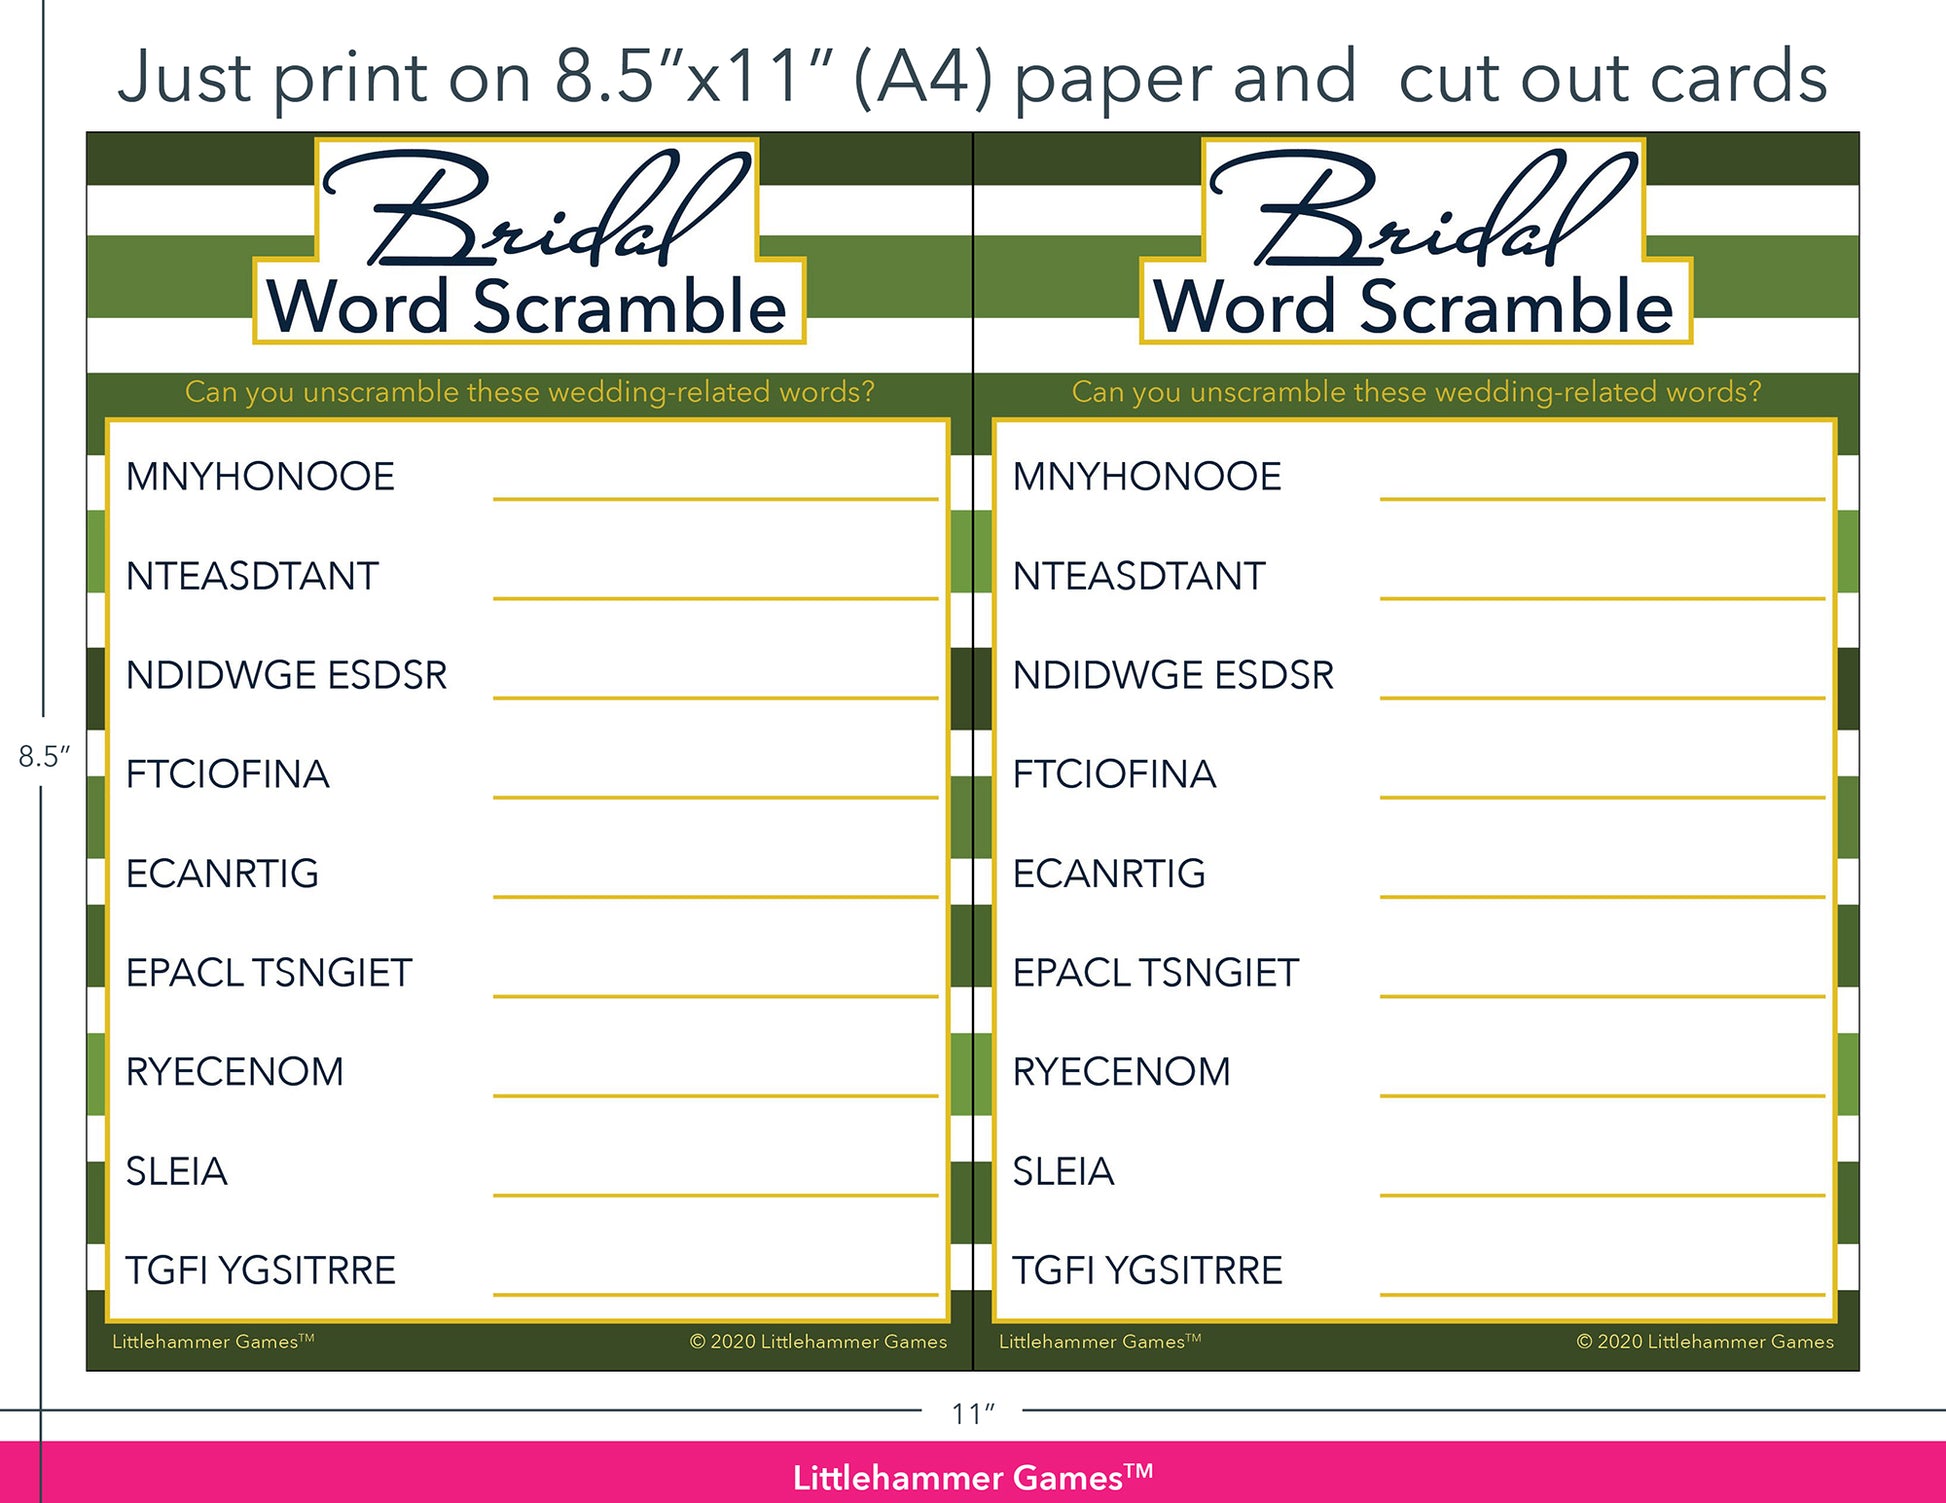 Bridal Word Scramble green-striped game cards with printing instructions